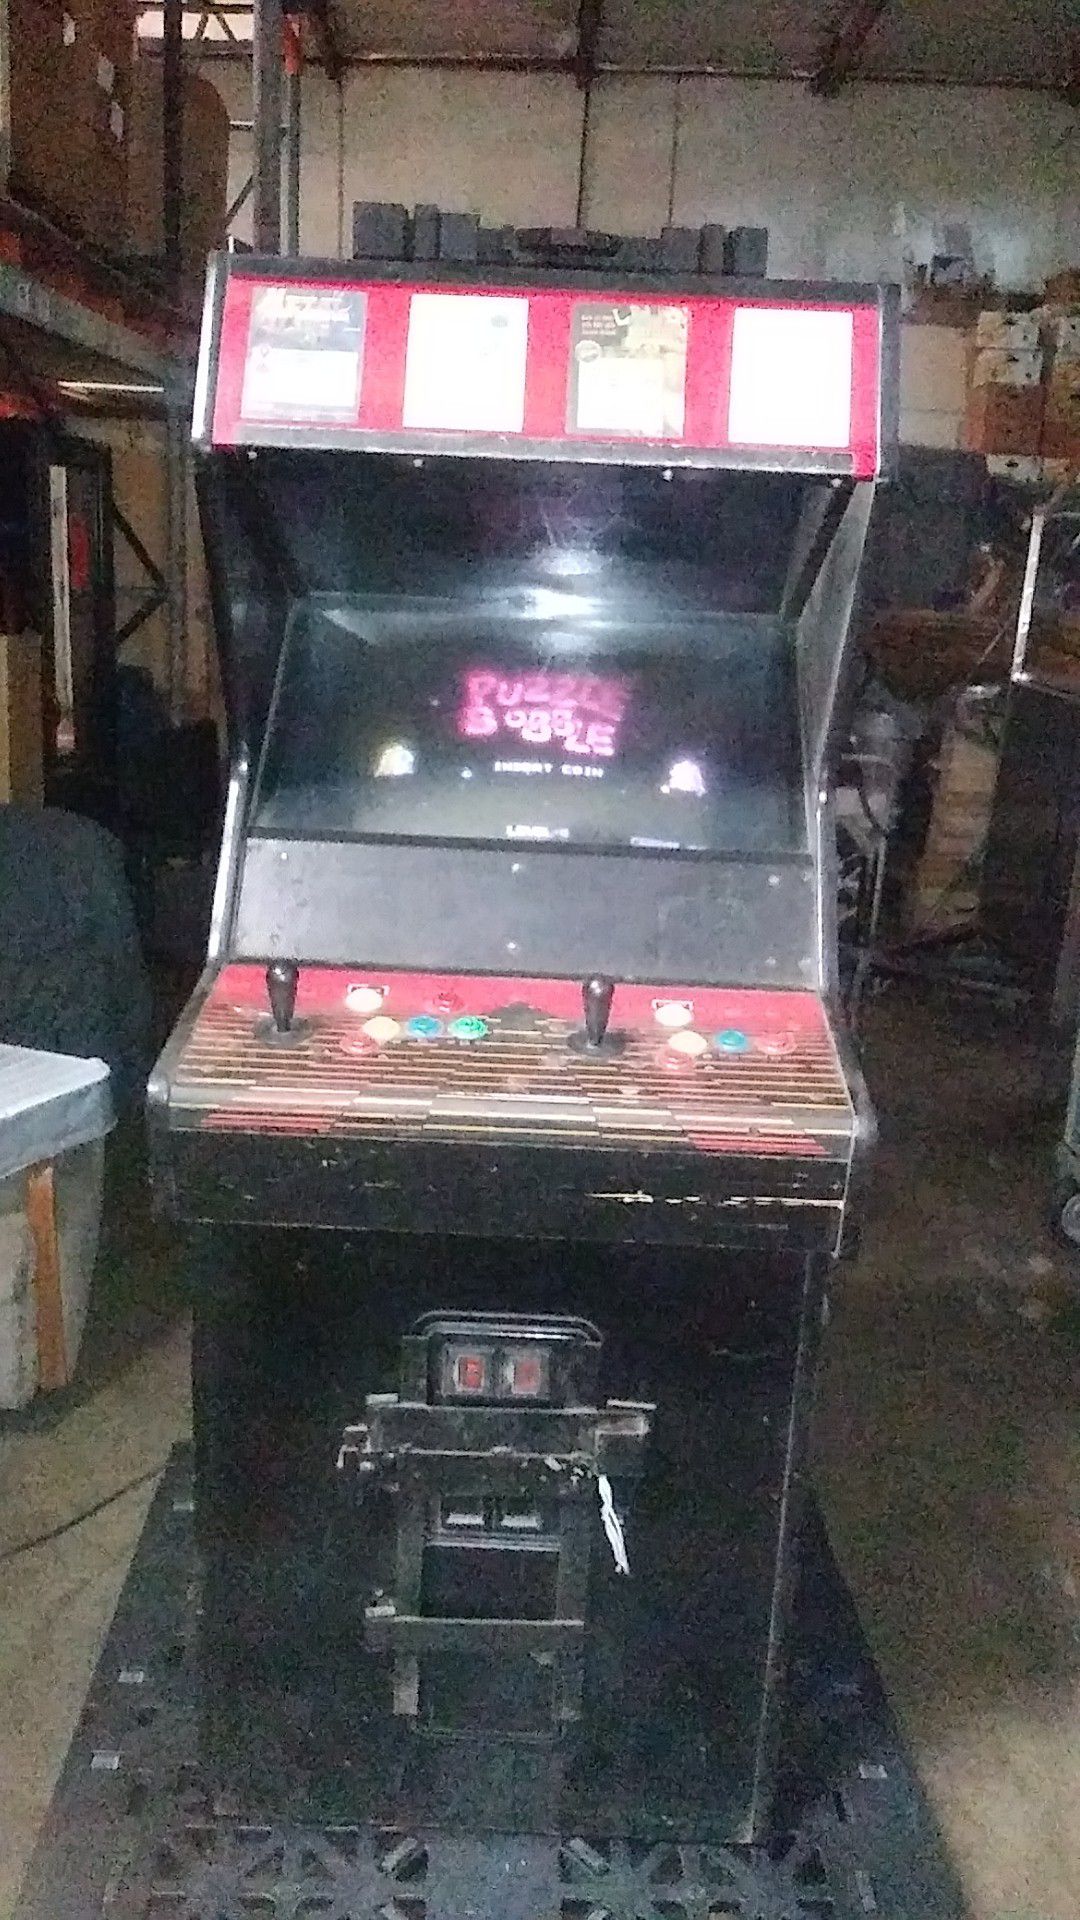 Arcade game, 4 games installed, used in good condition